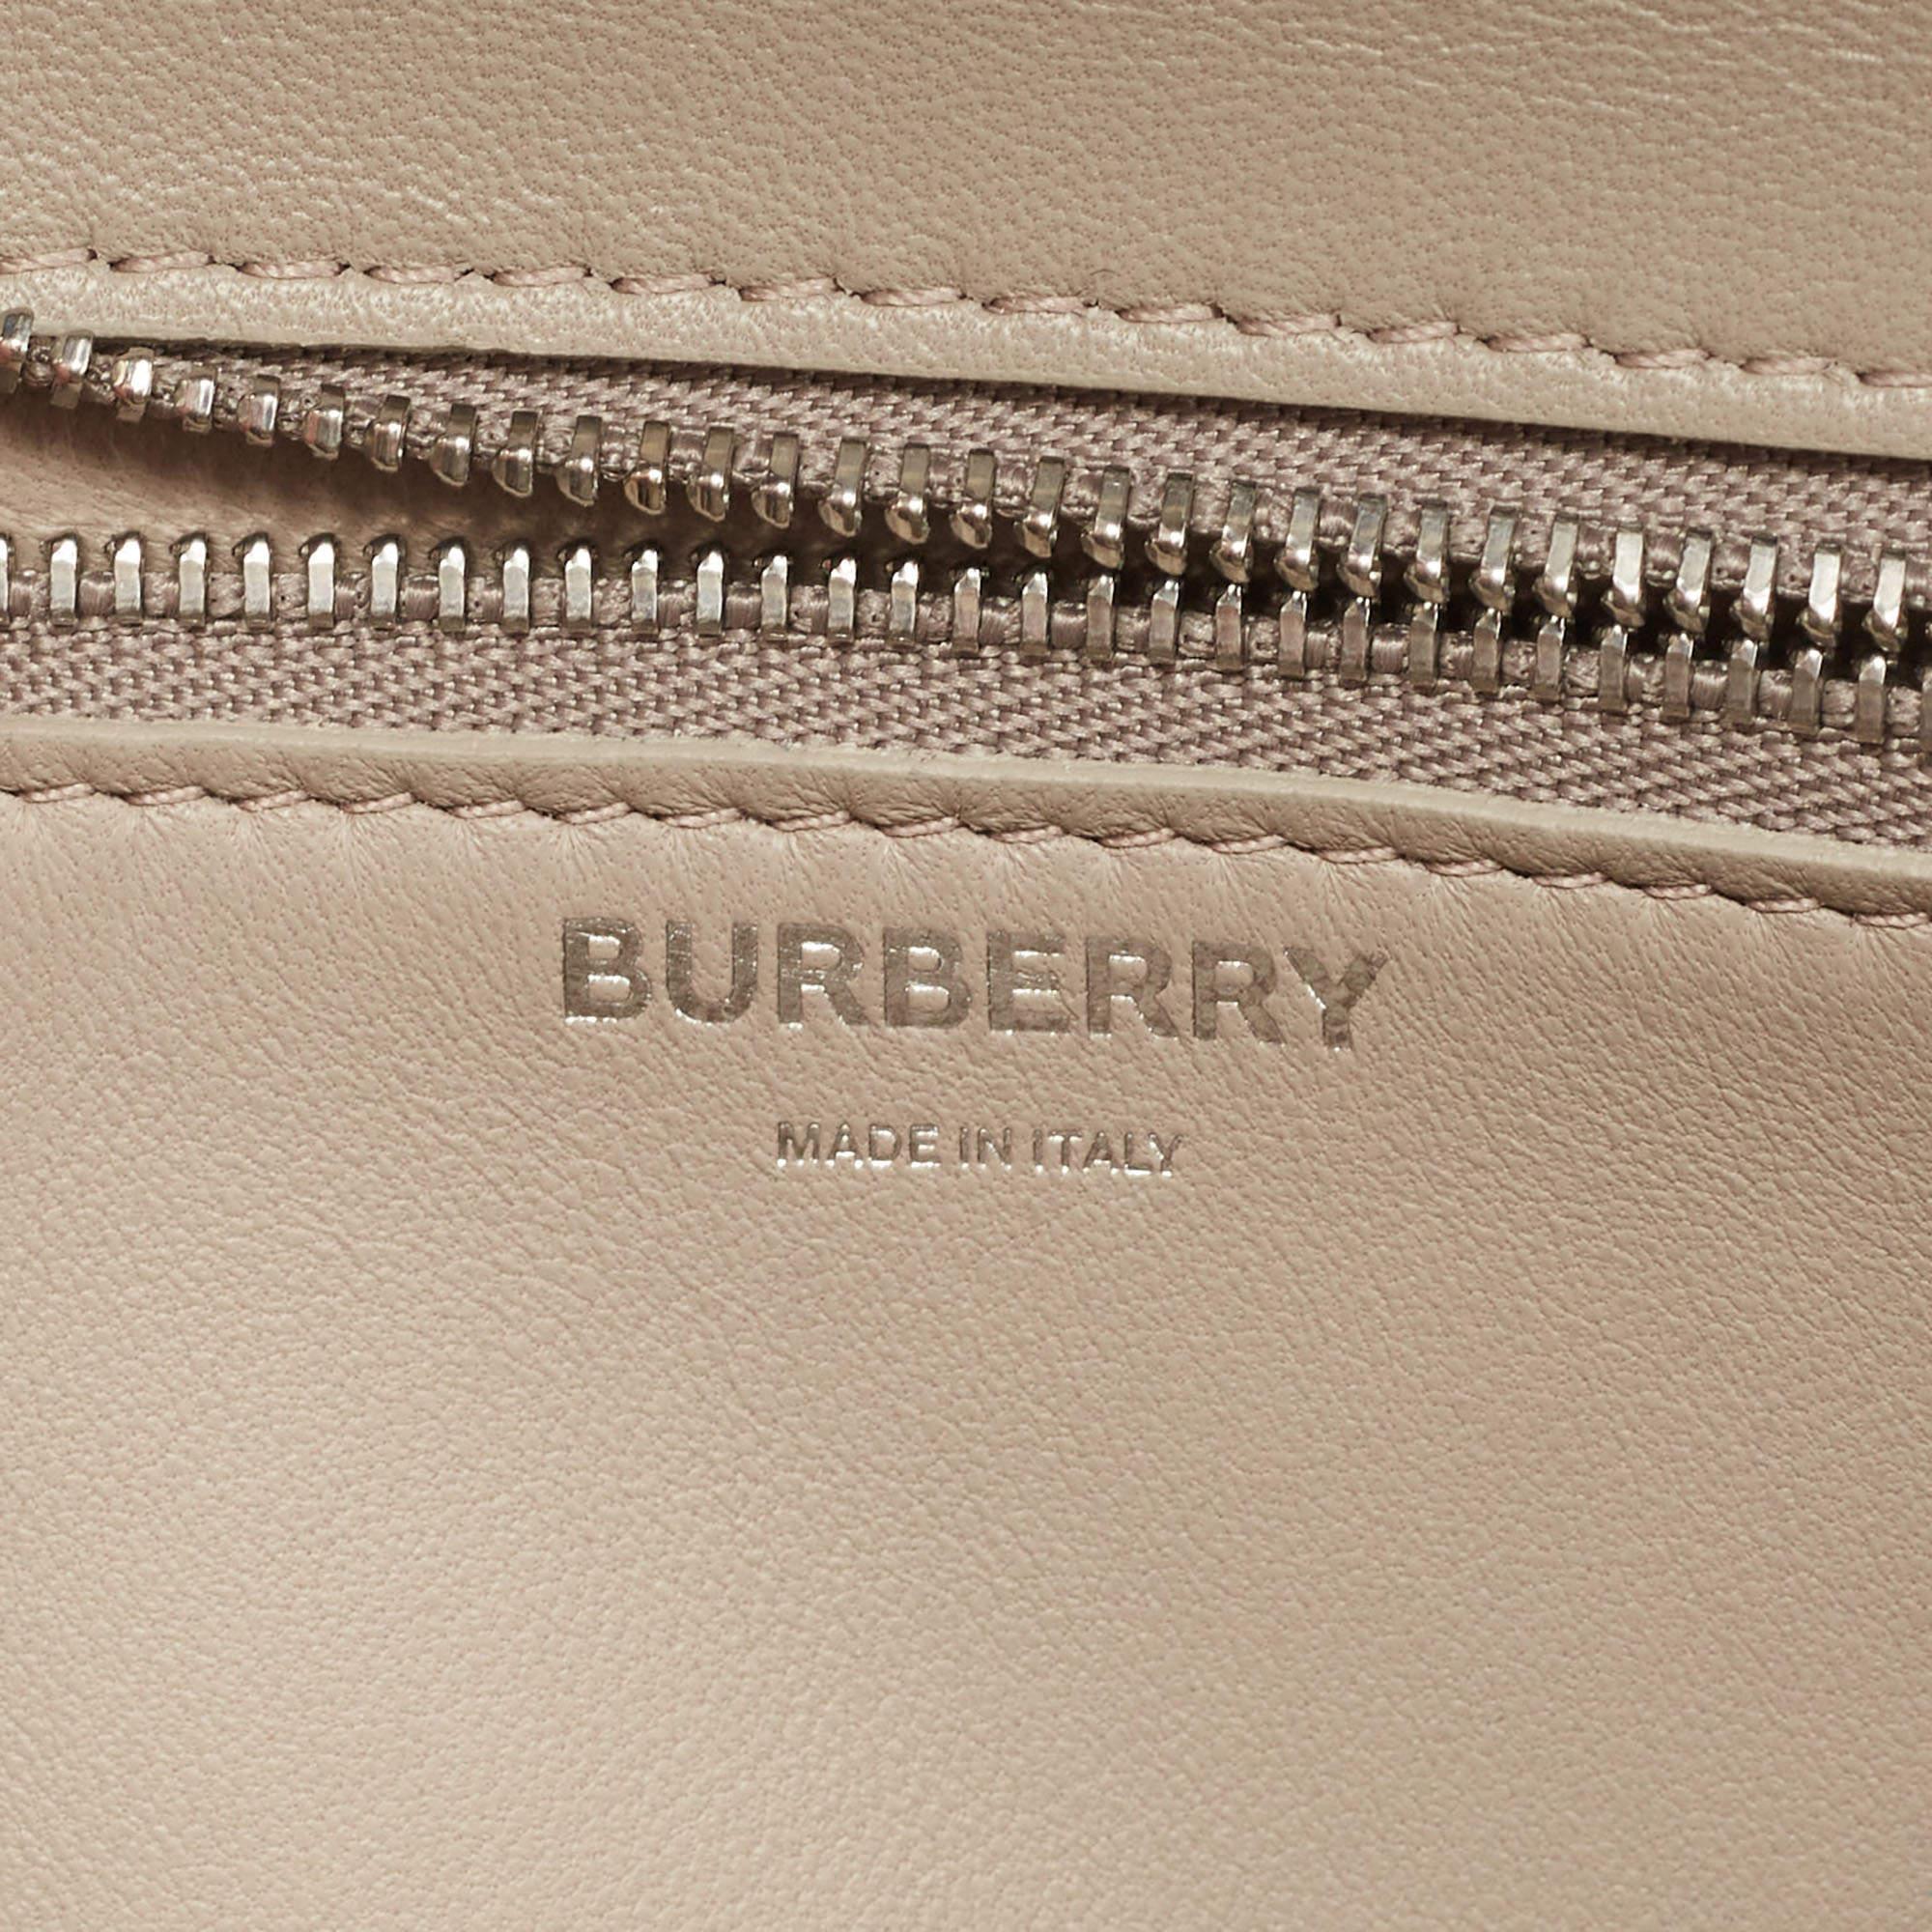 Burberry Silver Croc-Embossed Leather TB Buckle Crossbody Bag 7